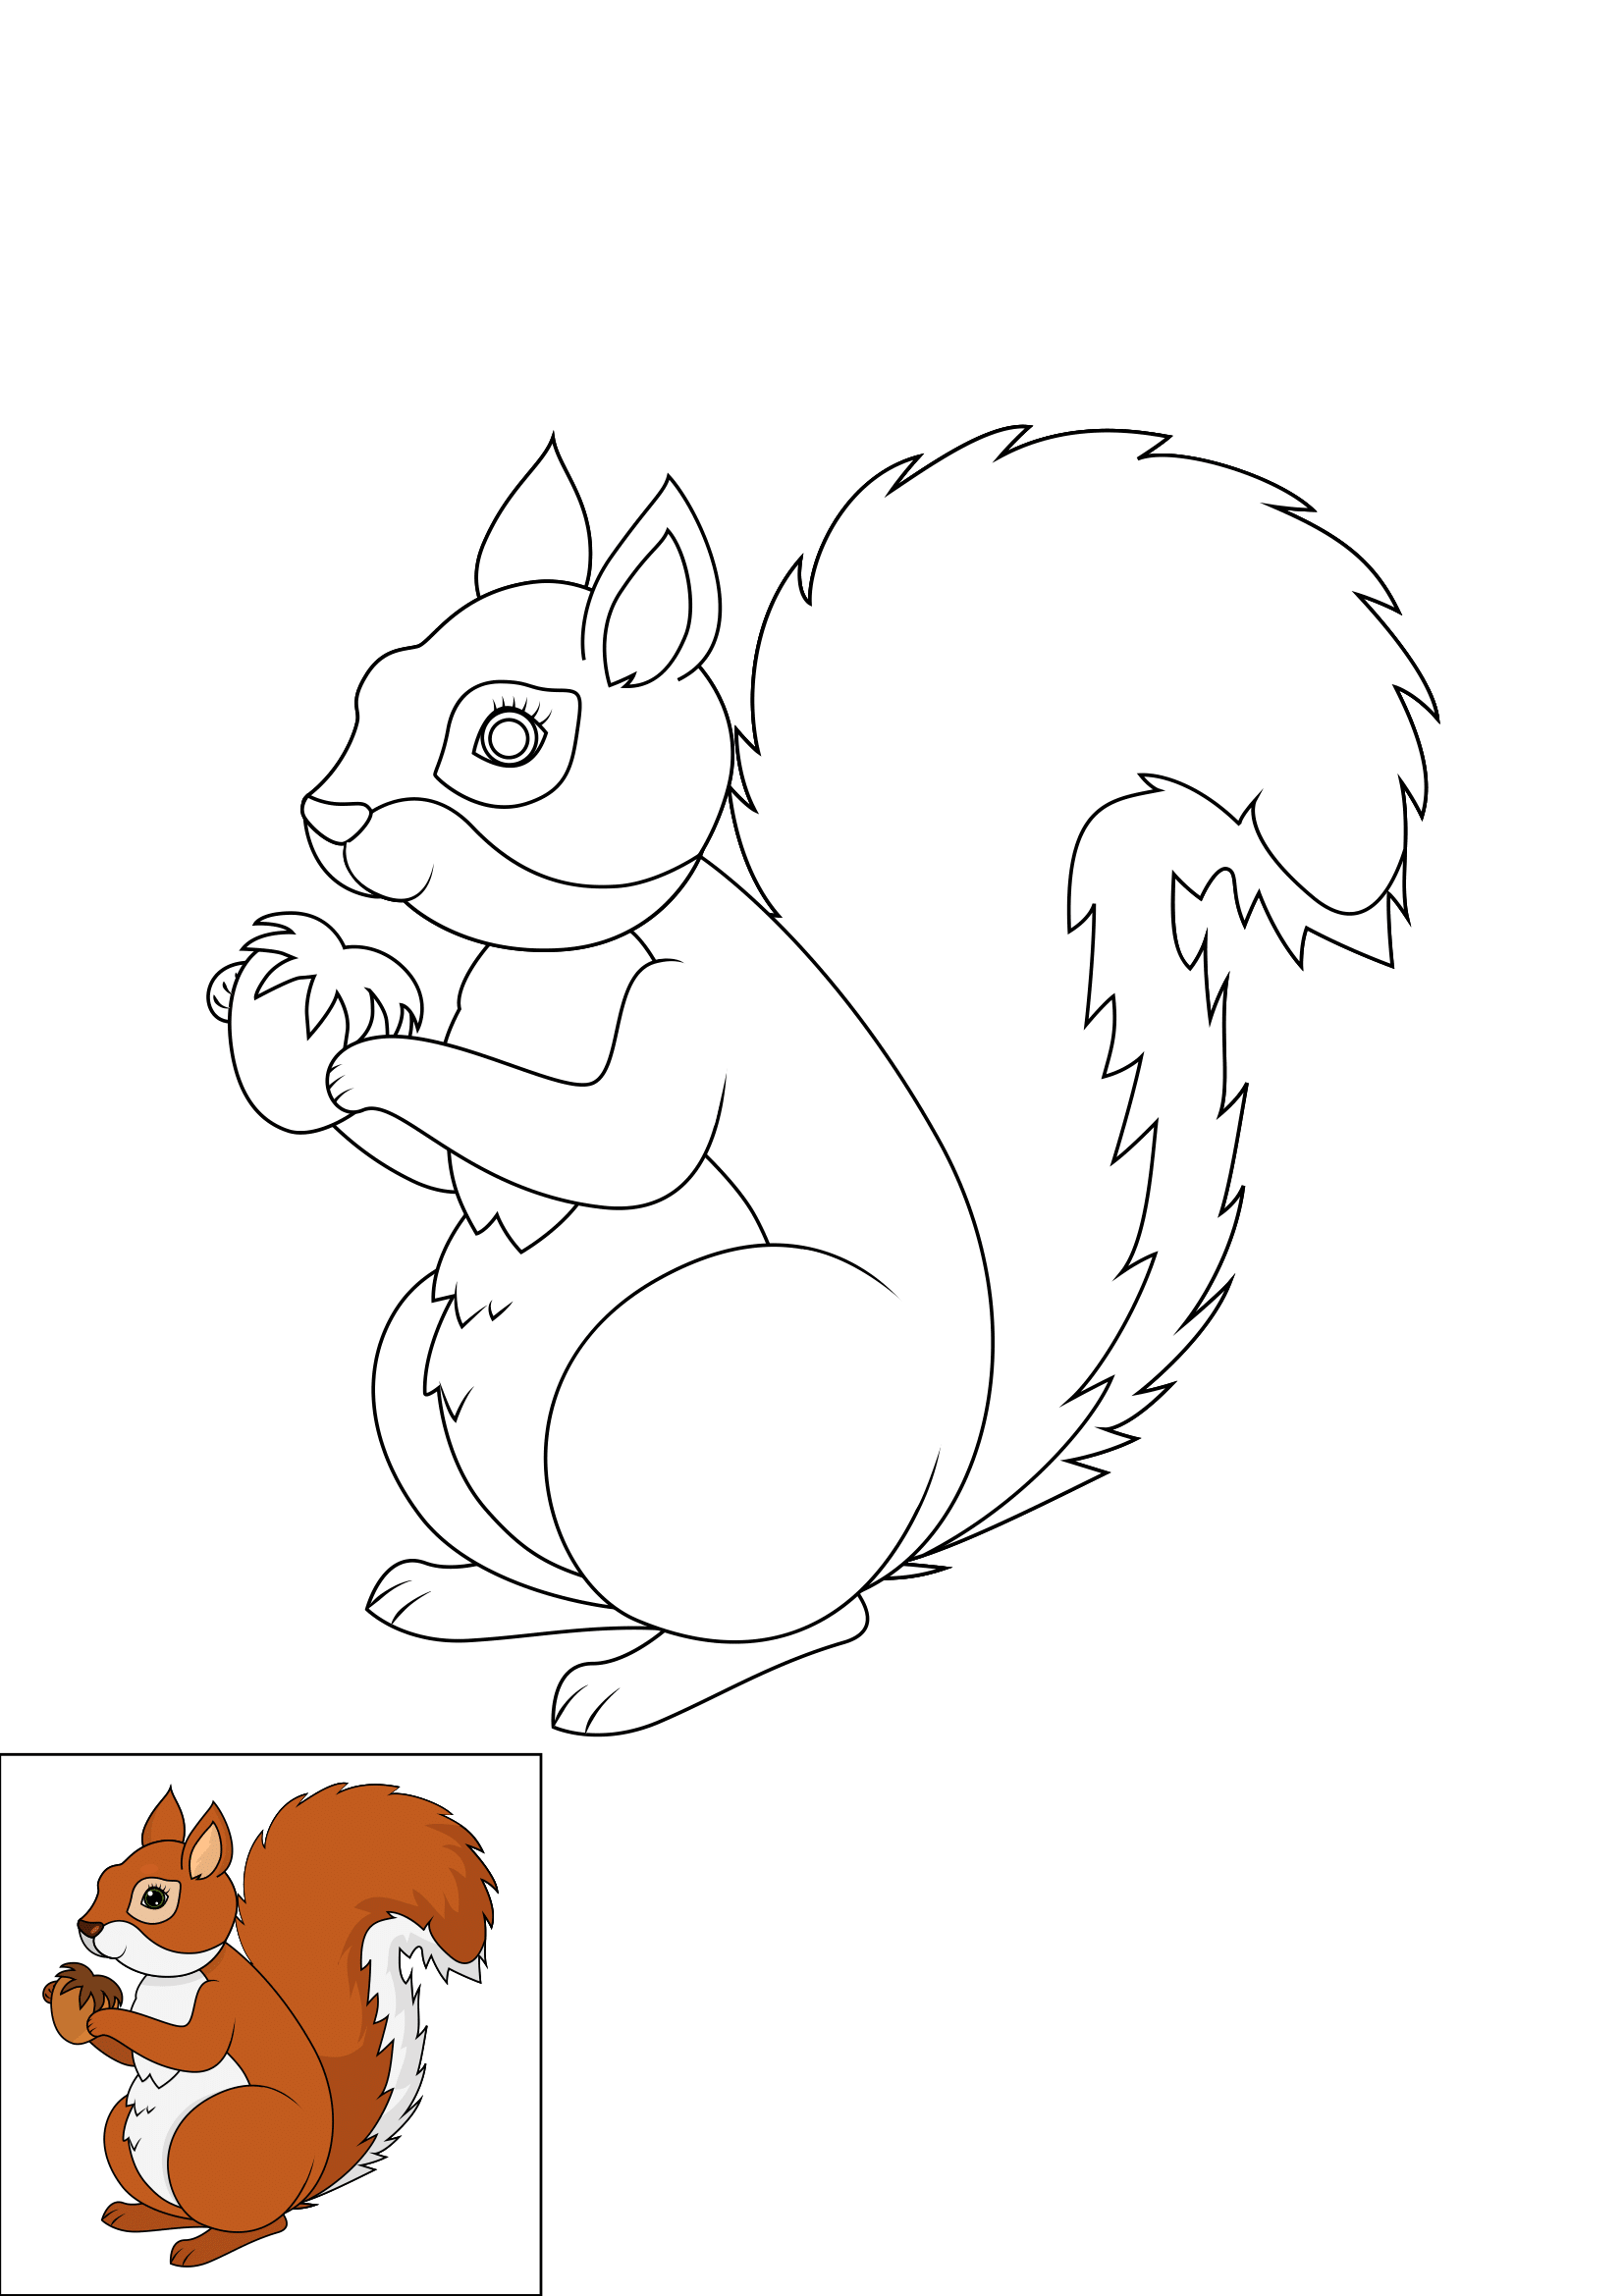 How to Draw A Squirrel Step by Step Printable Color